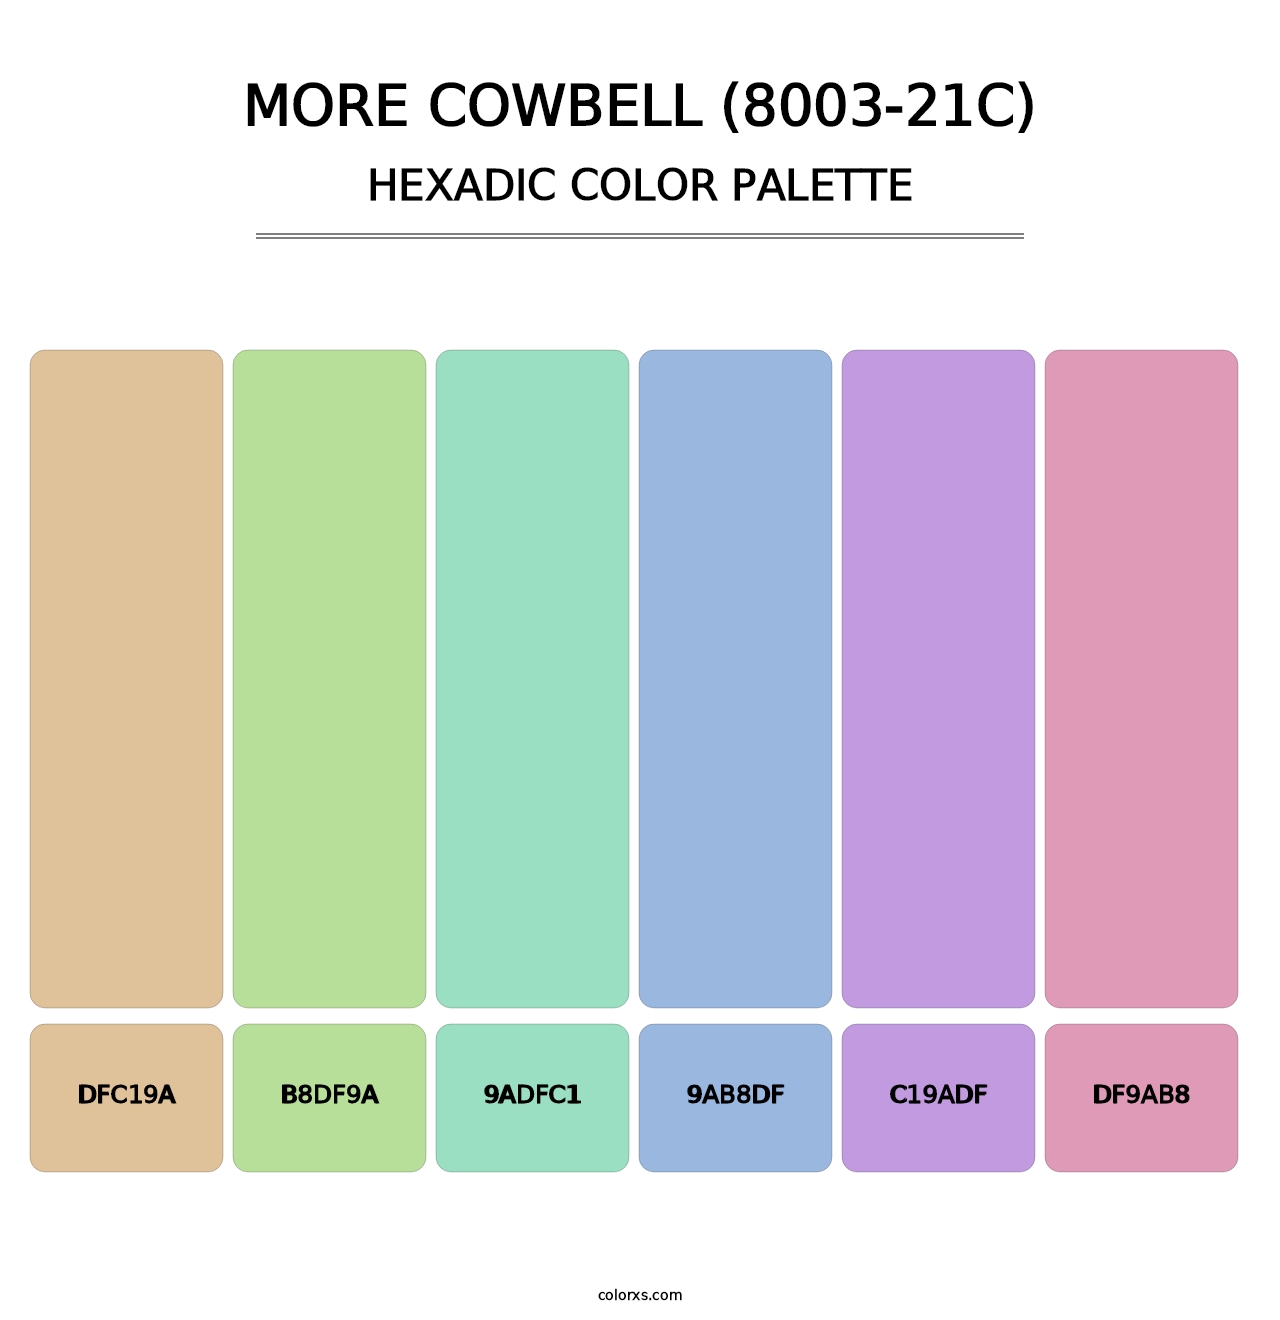 More Cowbell (8003-21C) - Hexadic Color Palette